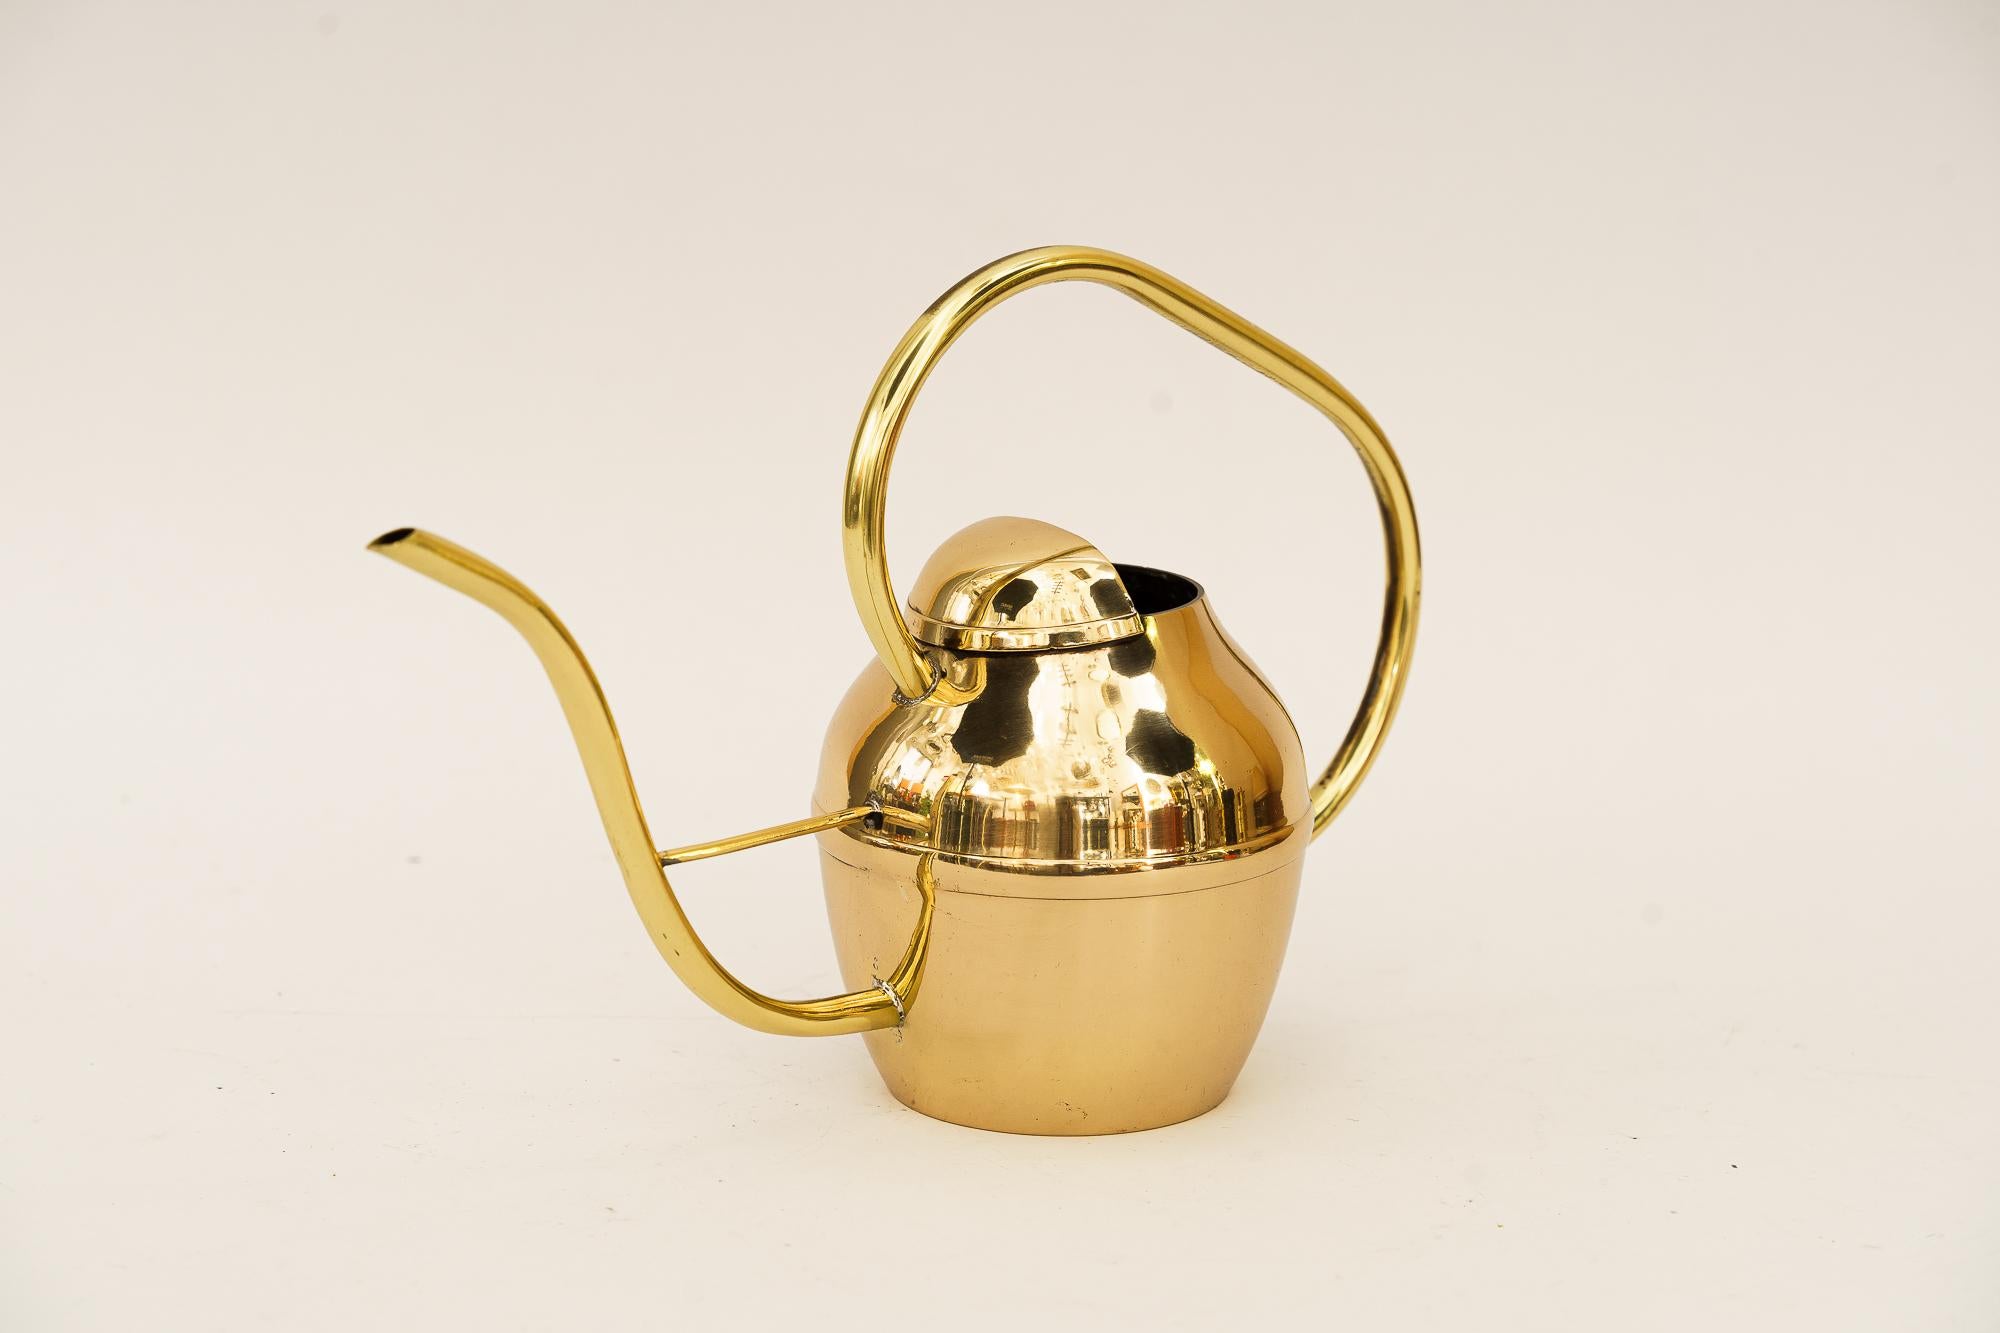 Watering Can vienna around 1960s
Brass polished and stove enameled